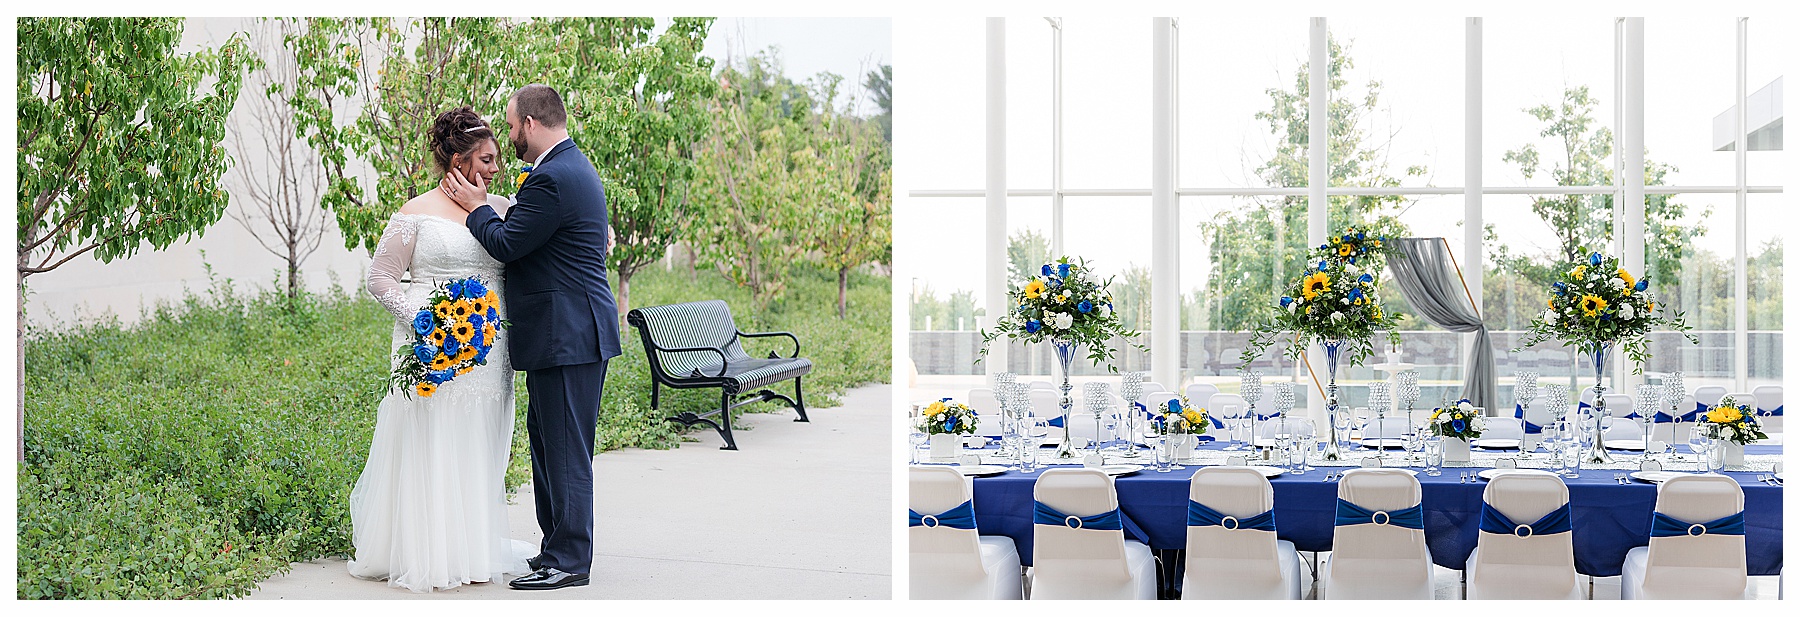 Royal blue and sunflowers wedding decor at the Bismarck Heritage Center
